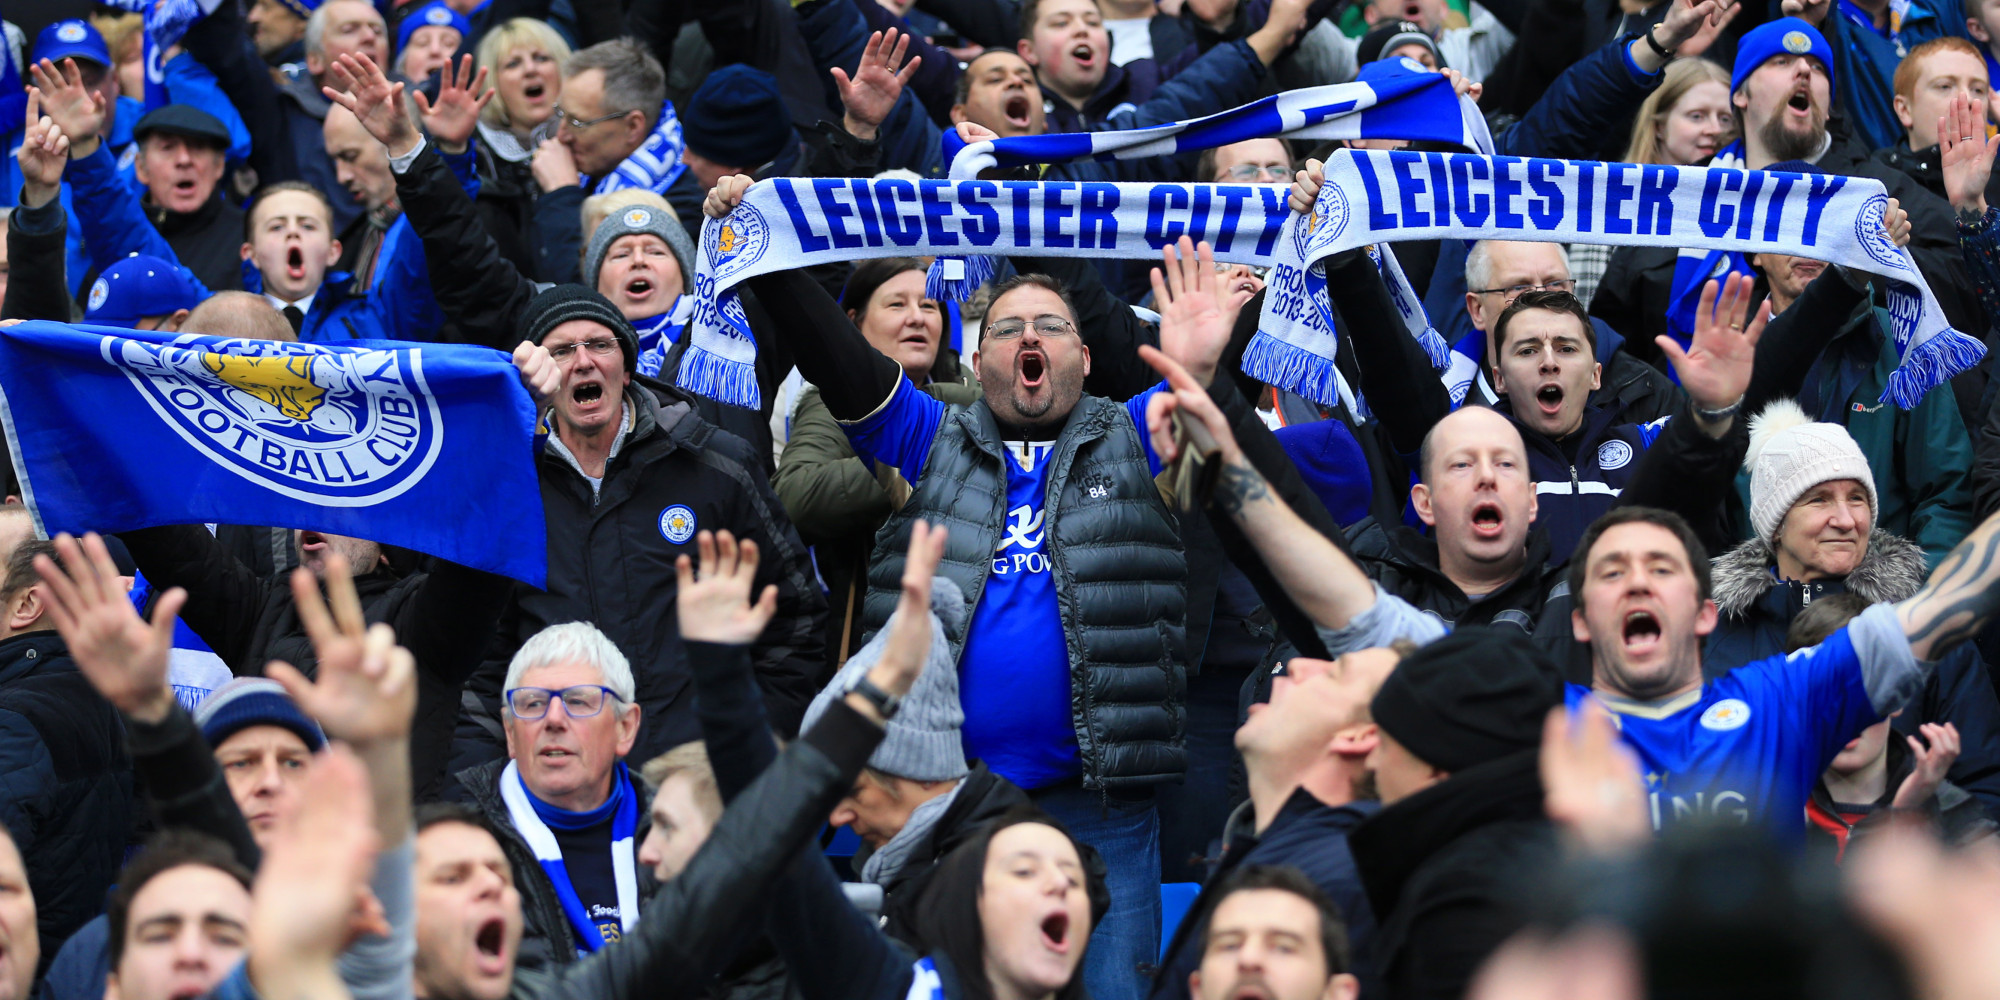 MANCHESTER, ENGLAND - FEBRUARY 06: Leicester fans celebrate during the Barclays Premier League match between Manchester City and Leicester City at the Etihad Stadium on February 6, 2016 in Manchester, England. (Photo by Simon Stacpoole/Mark Leech Sports Photography/Getty Images)